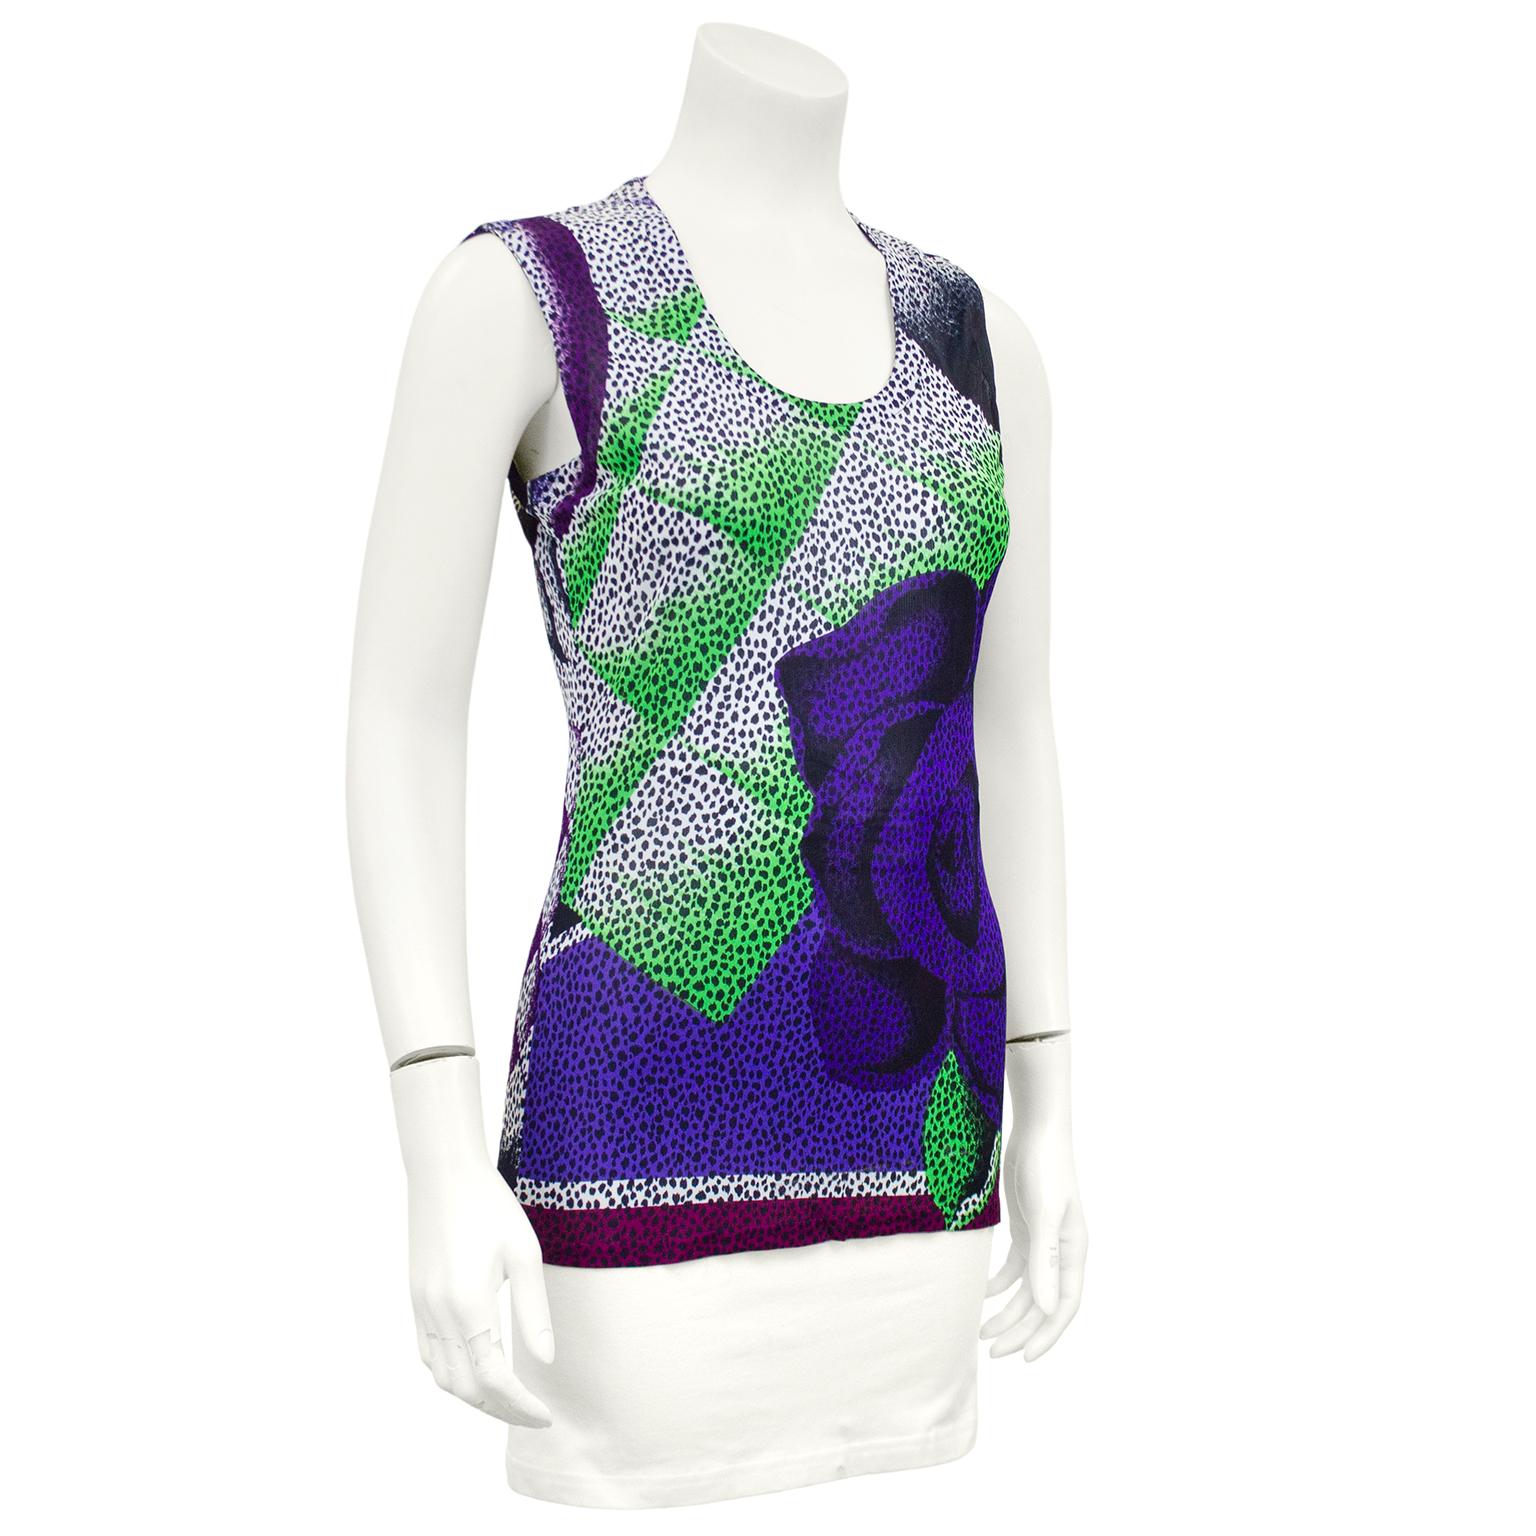 1990s Gianni Versace silk mesh sleeveless shirt with boat neckline. White, green and purple with all over animal print. Large rose detail on front with abstract rose details on back. Excellent vintage condition, fits like a US size 4. Made in Italy. 